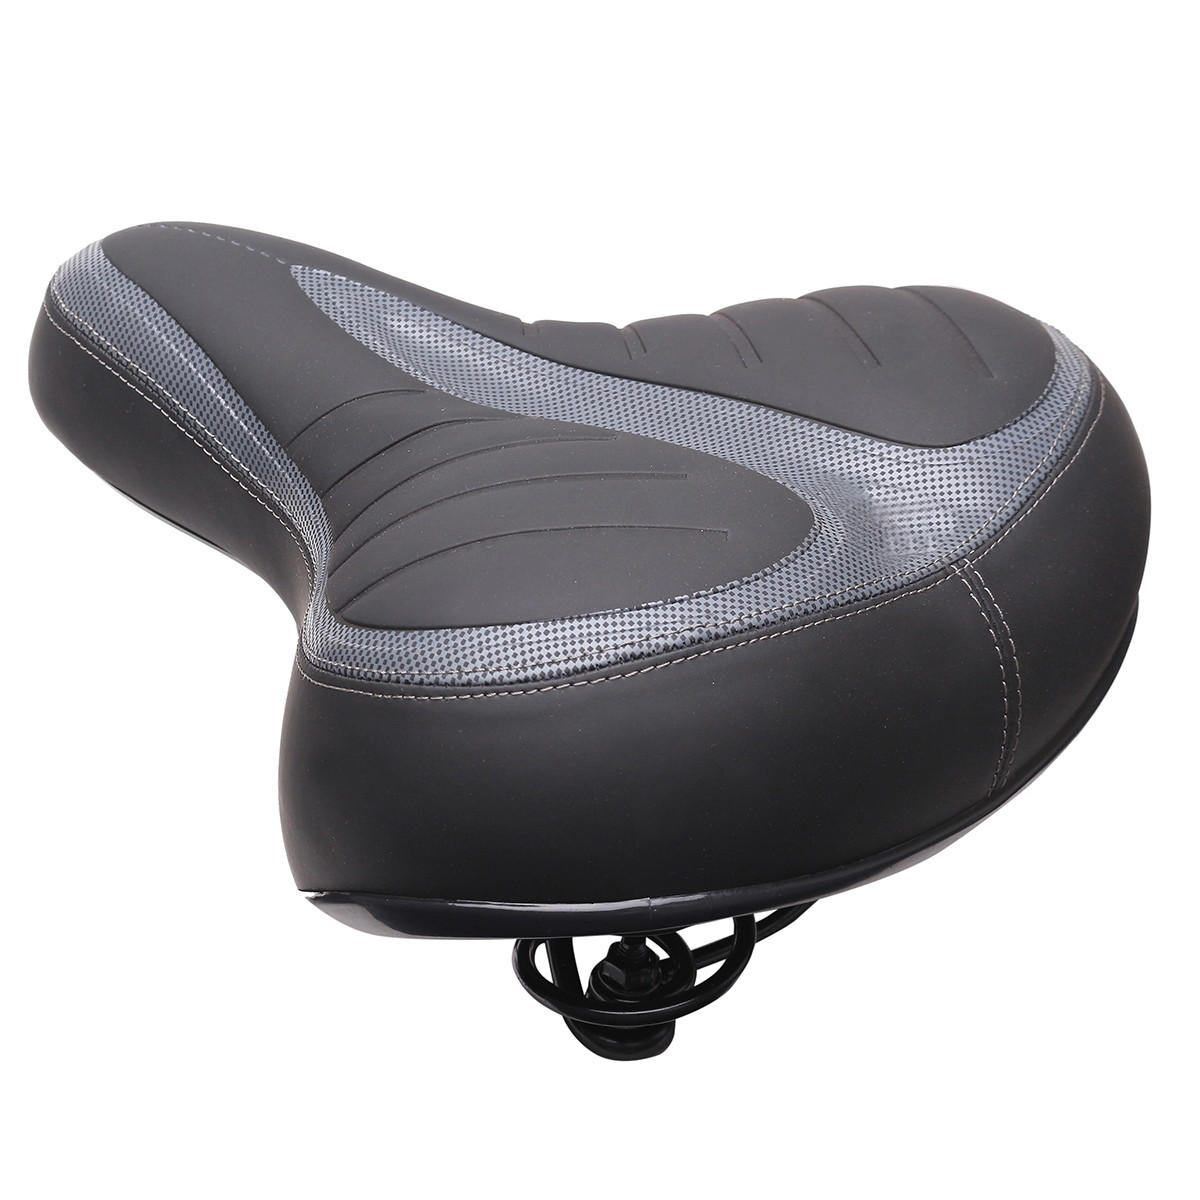 Details about   Comfort Wide Big Bum Bike Bicycle Cushion Extra Sporty Soft Gel Pad Saddle Seat 